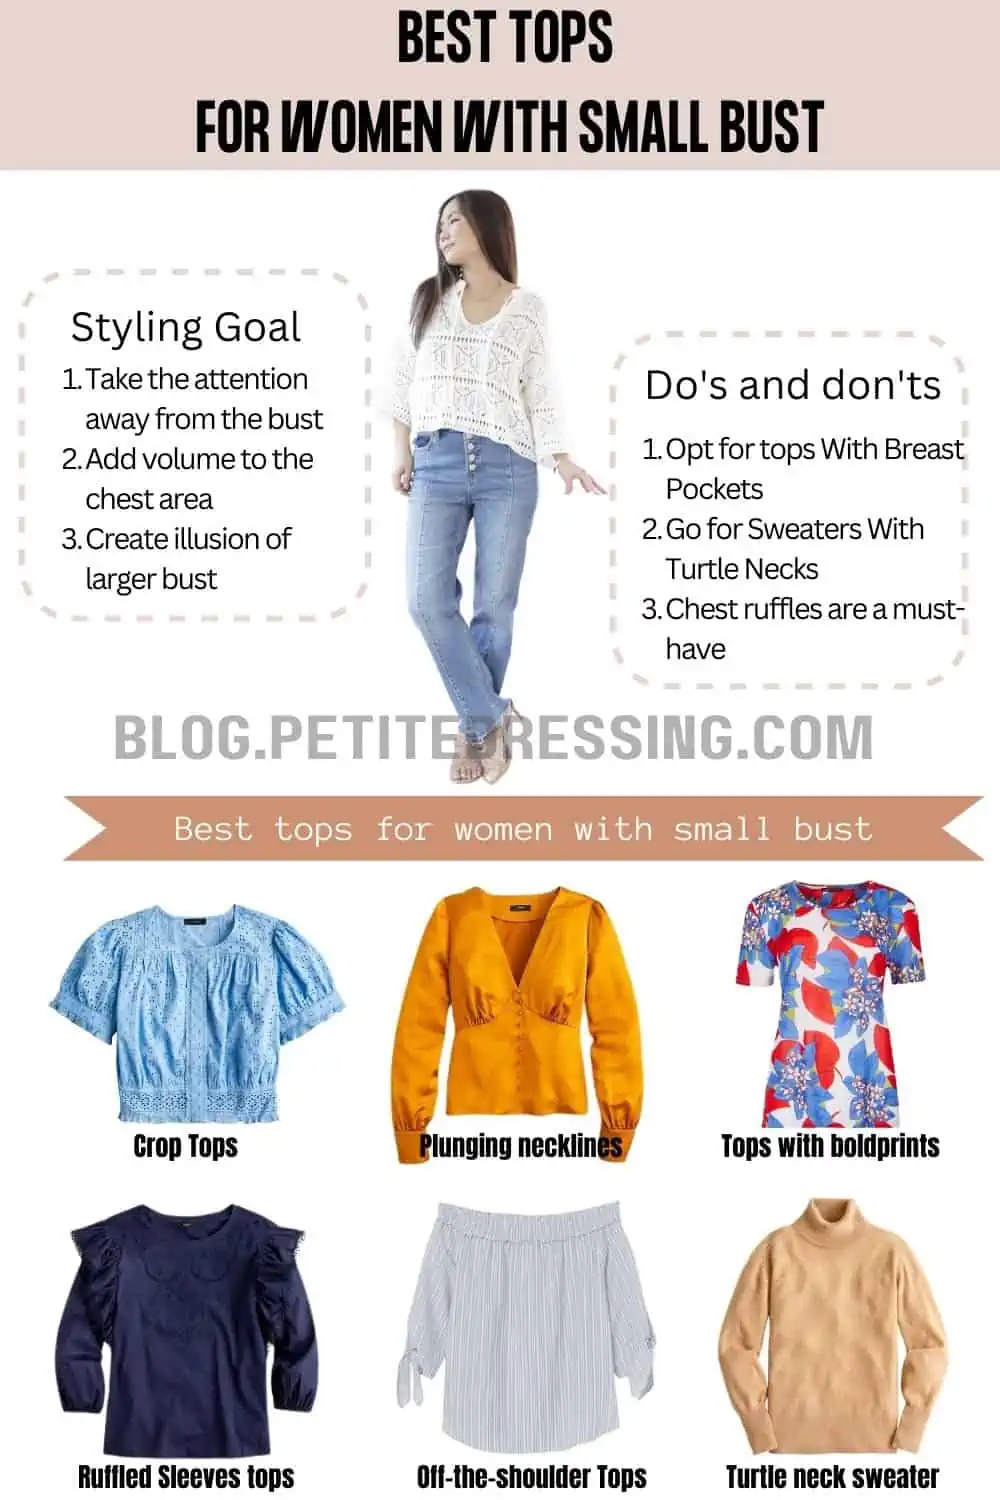 My fave tops for small chests!! #smallchests #ibtc #styletips